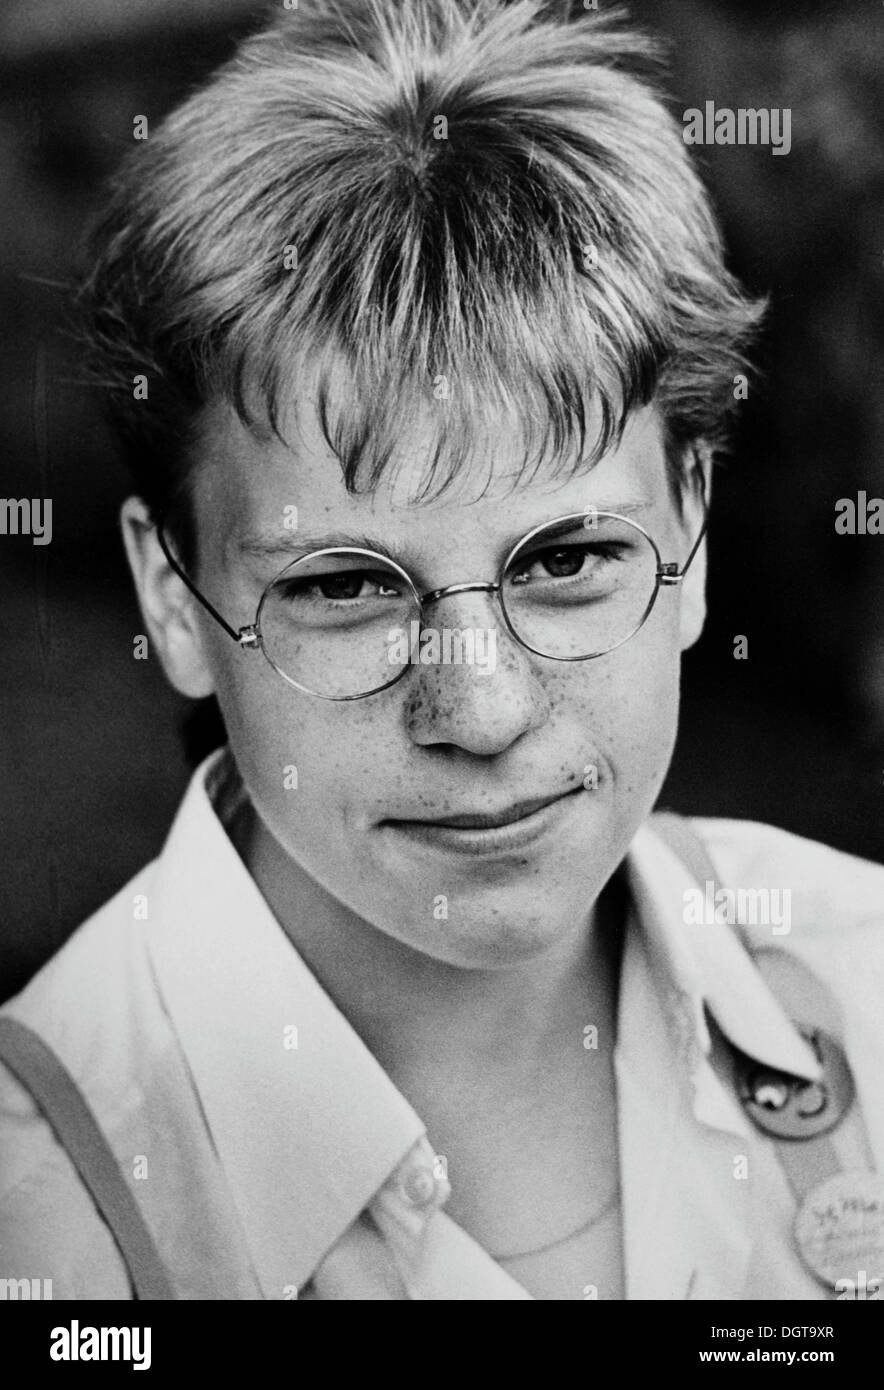 Teenager, East Germany, German Democratic Republic, GDR, about 1984 Stock Photo